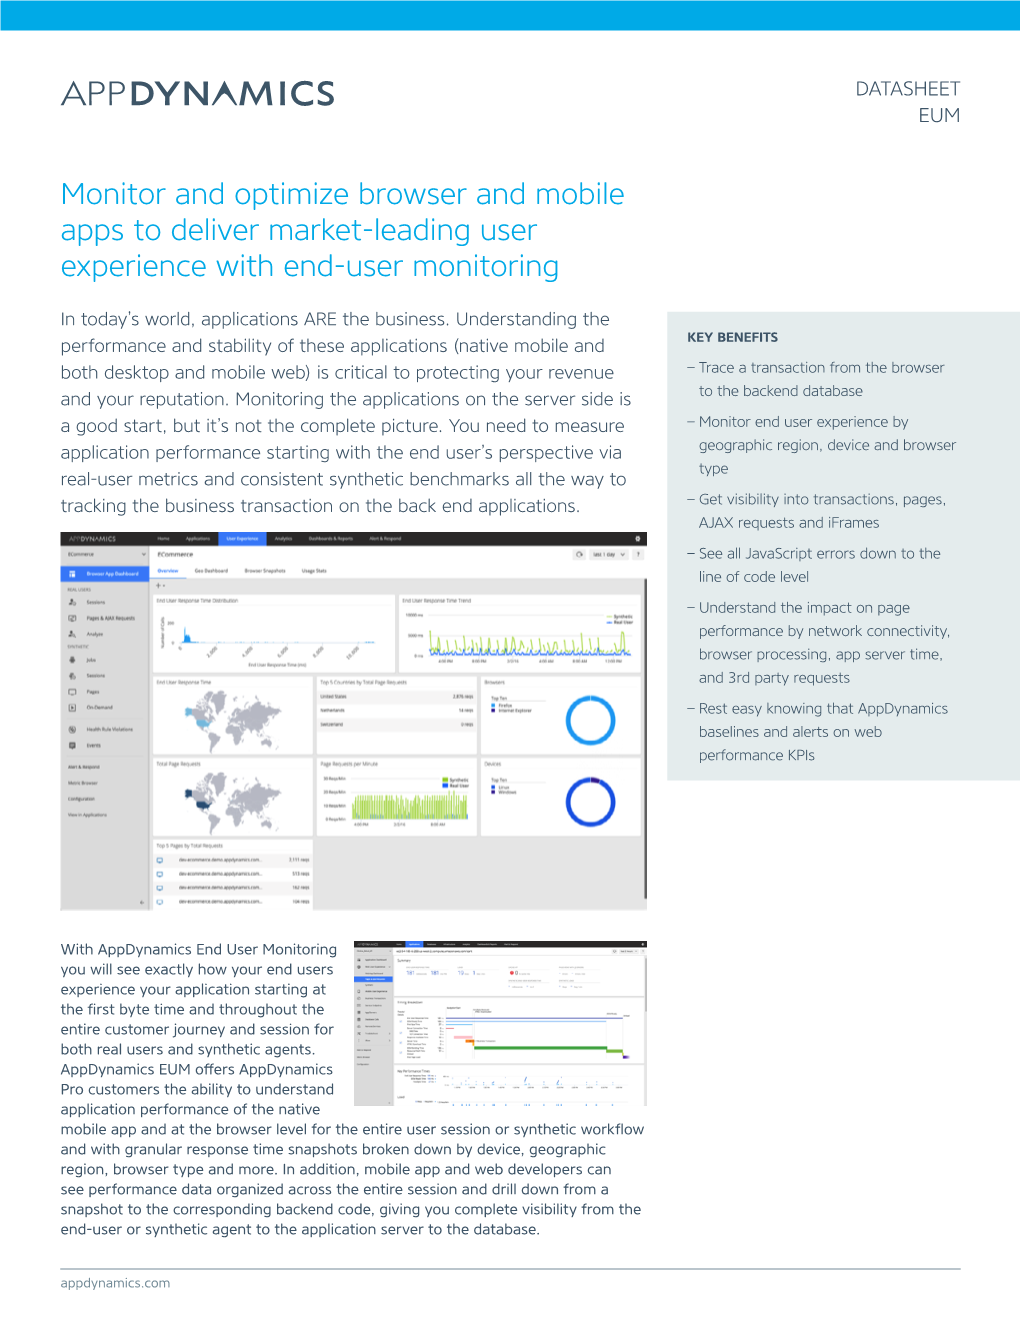 Monitor and Optimize Browser and Mobile Apps to Deliver Market-Leading User Experience with End-User Monitoring